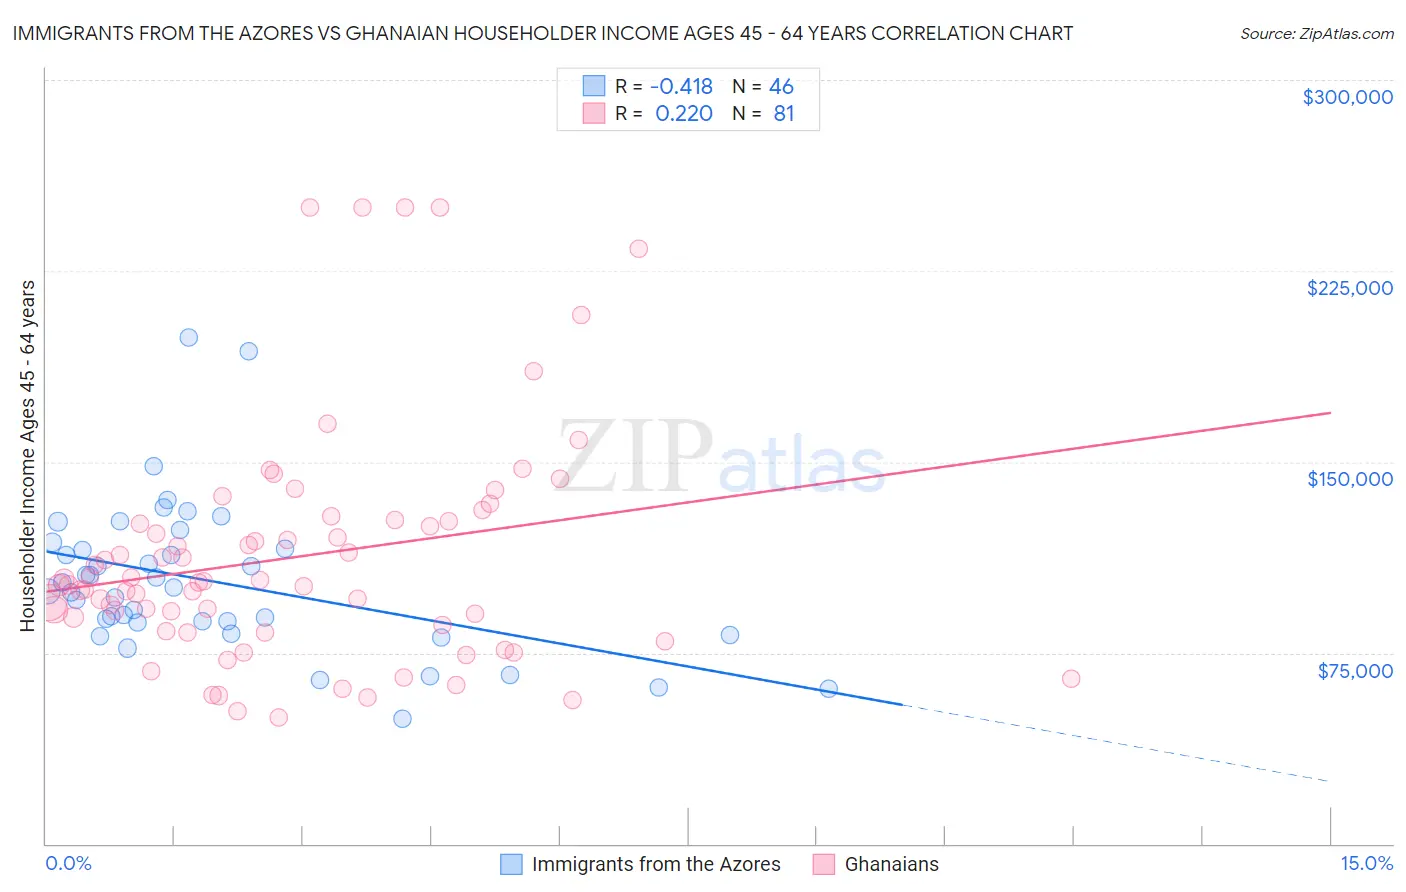 Immigrants from the Azores vs Ghanaian Householder Income Ages 45 - 64 years